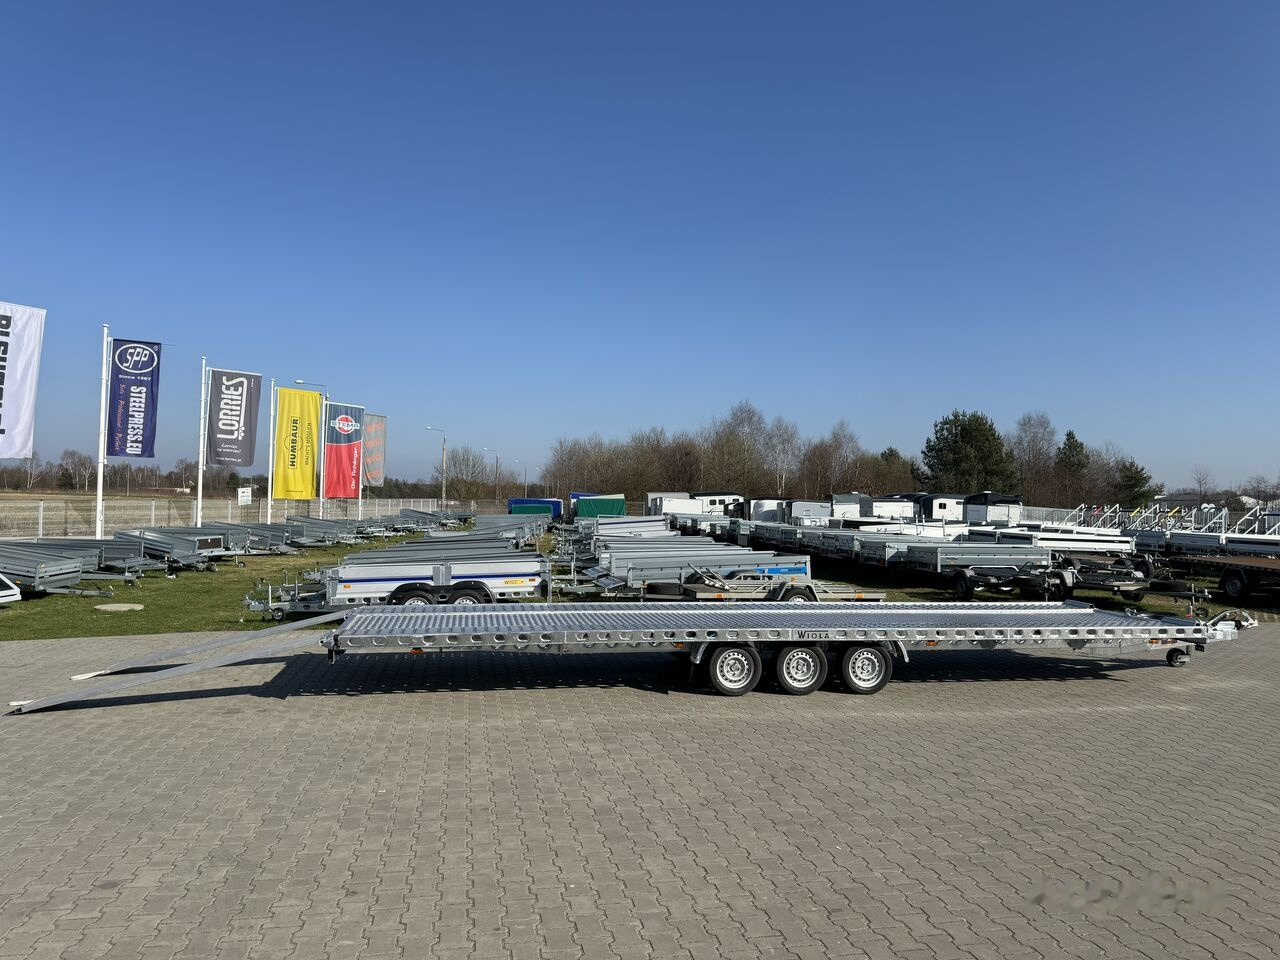 Remorque porte-voitures neuf Wiola L35G85 8.5m long trailer with 3 axles for transport of 2 cars: photos 28